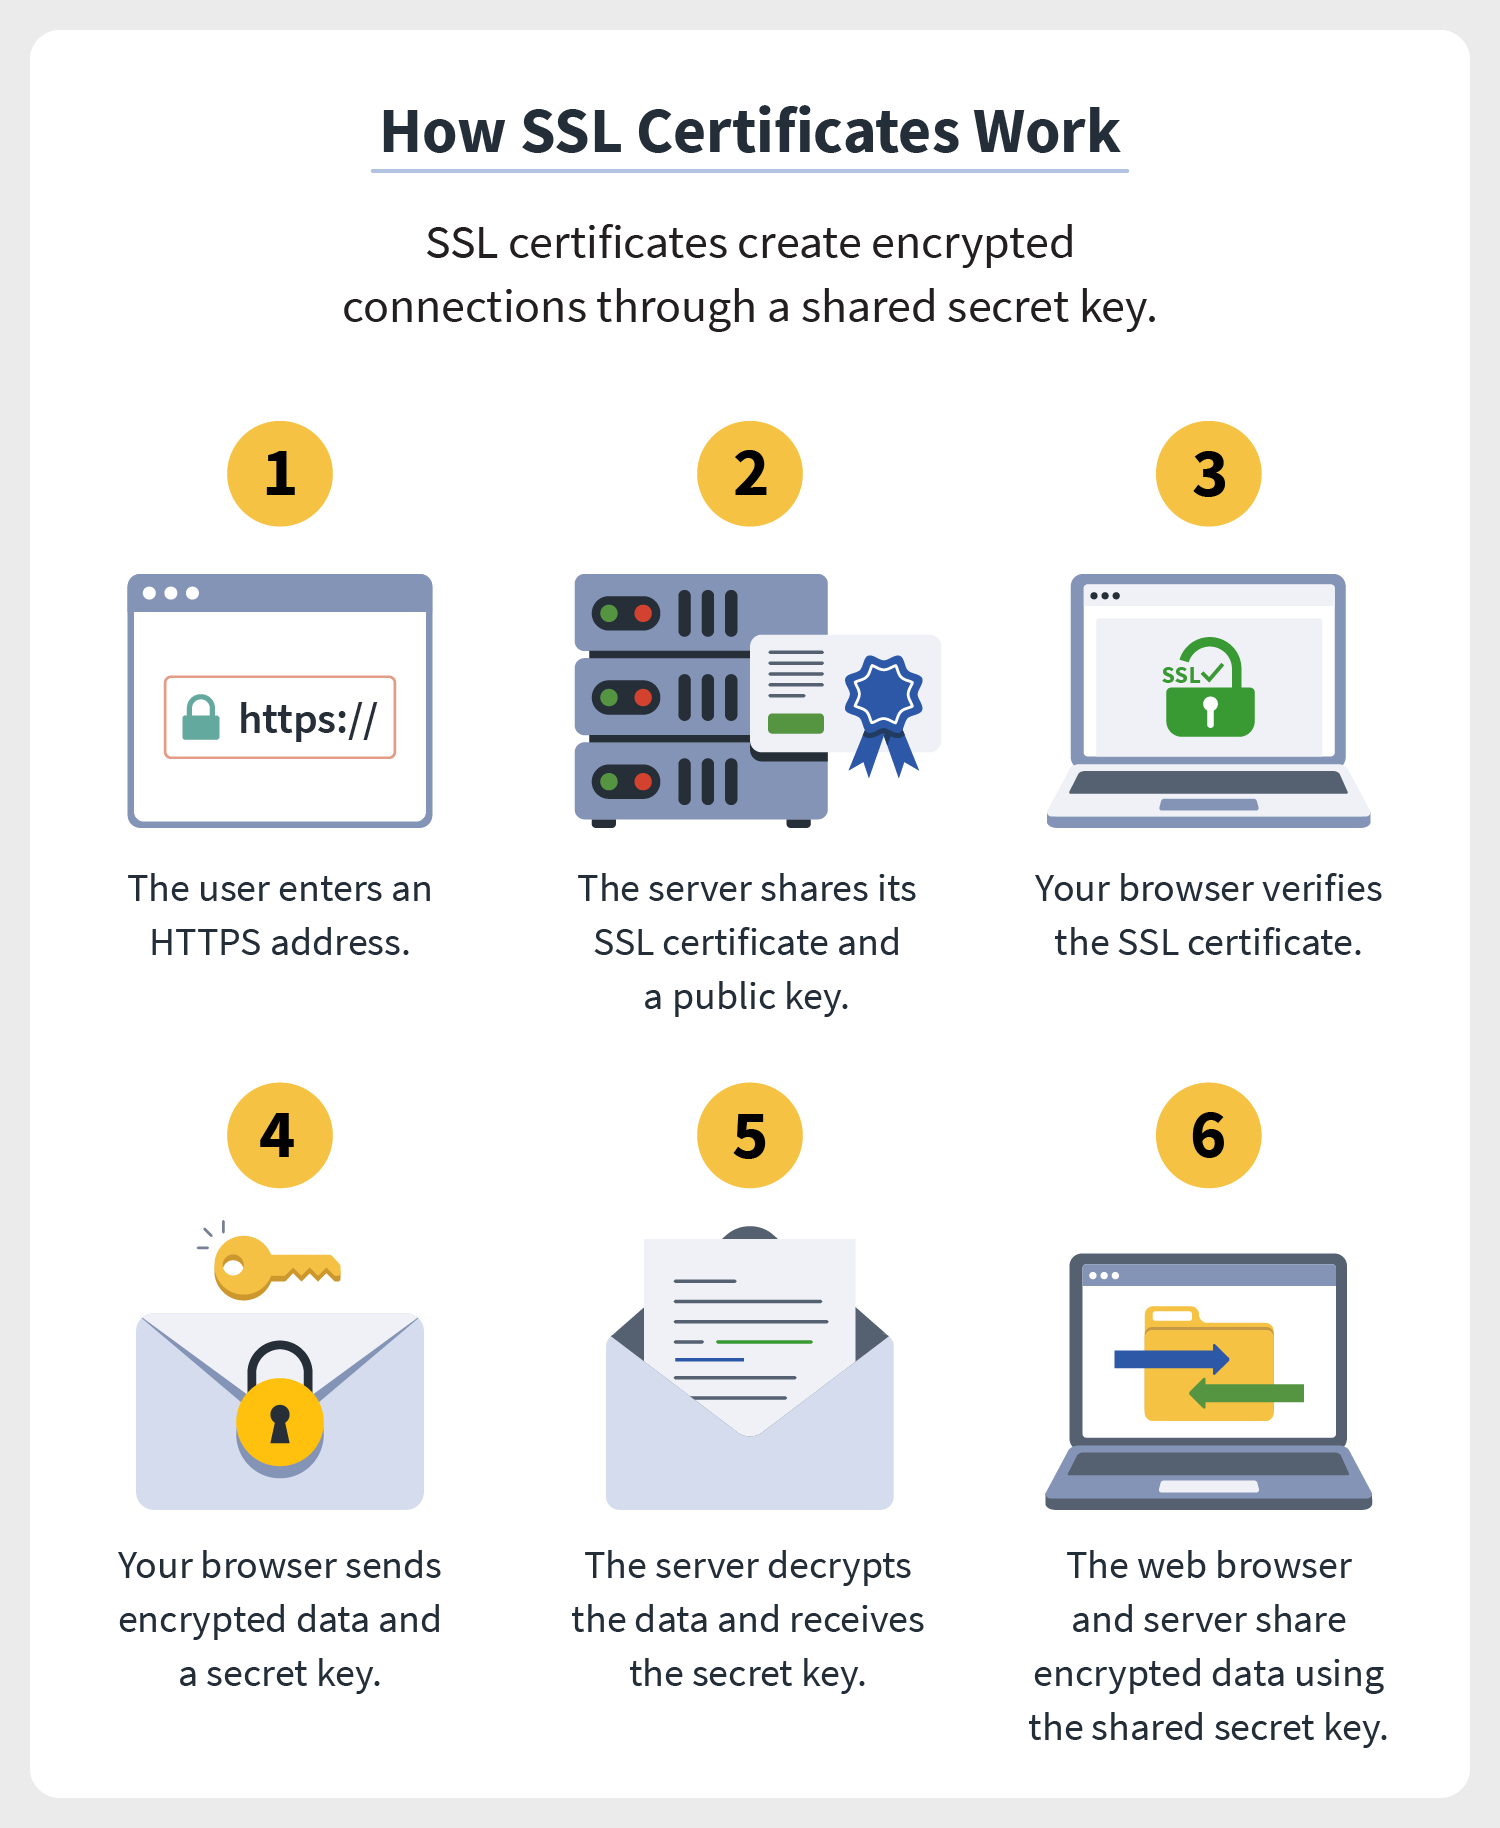 Six illustrations accompany a step-by-step breakdown of how SSL certificates work by creating encrypted connections. 